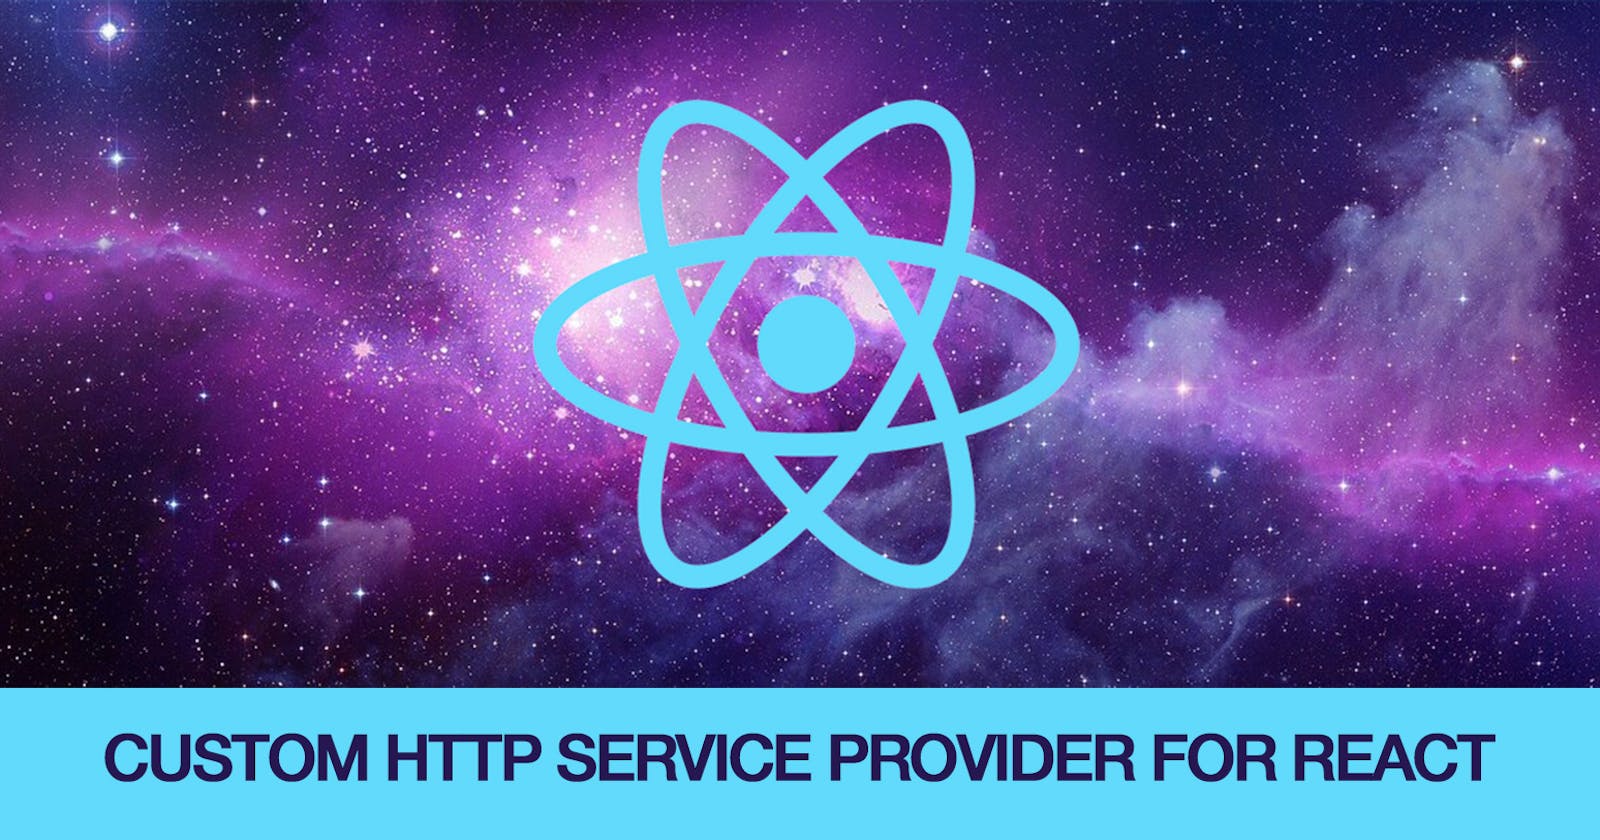 Creating a custom http service provider for React